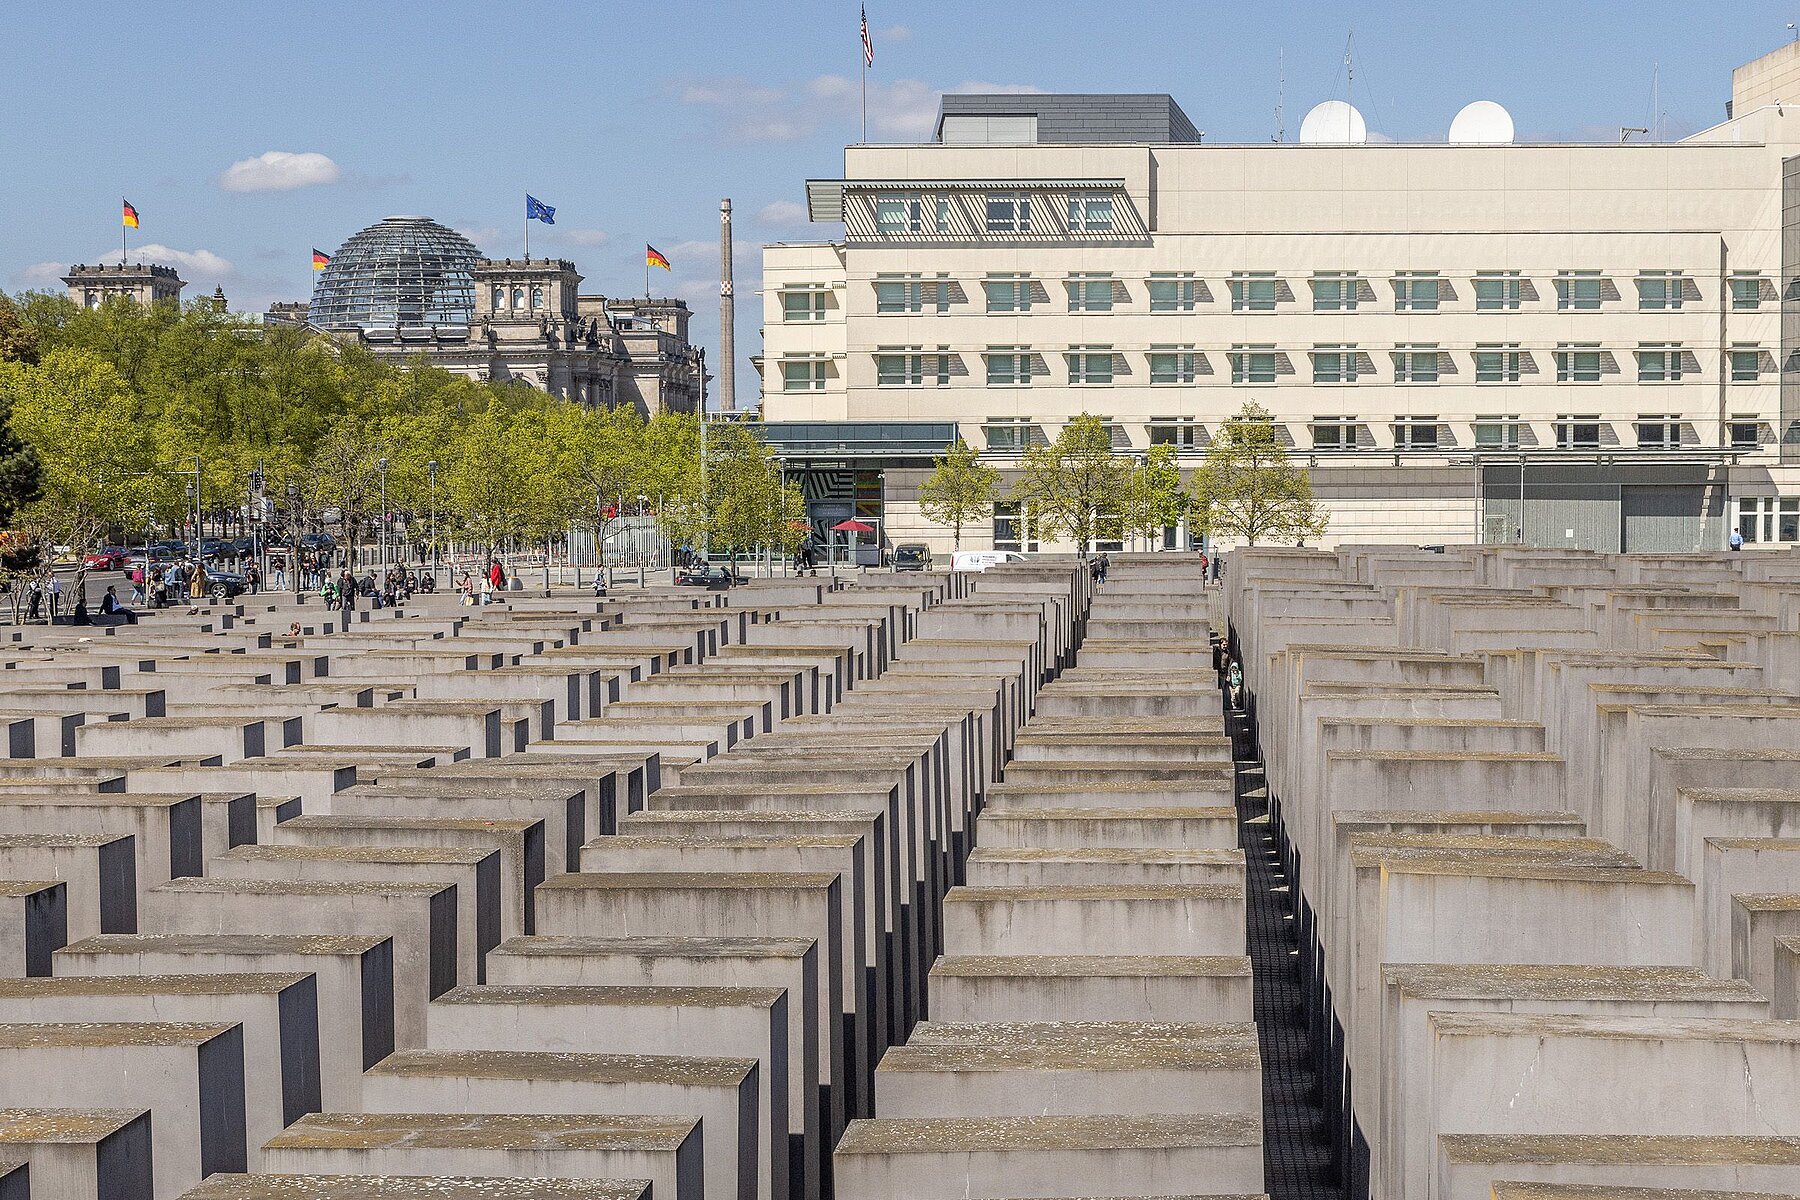 In the foreground are the concrete steles of the monument, in the background on the left is the Reichstag building with its dome, and in the back on the right is the white building of the USA embassy.